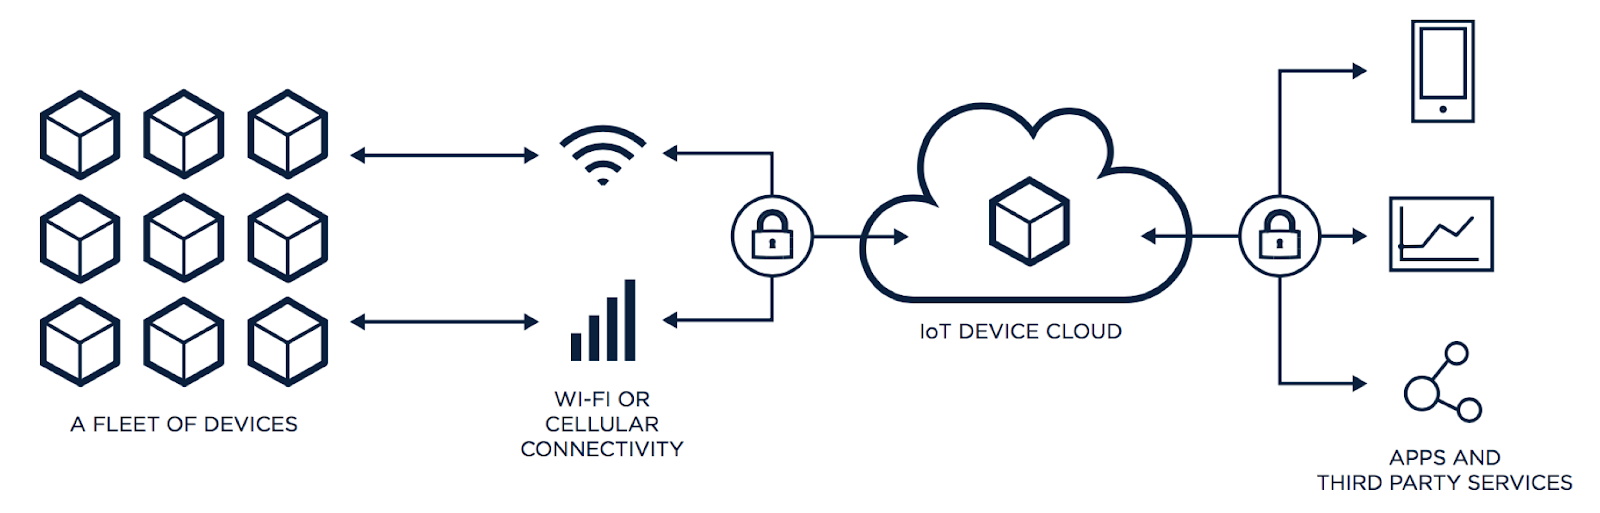 How To Choose The Right Iot Platform The Ultimate Checklist By